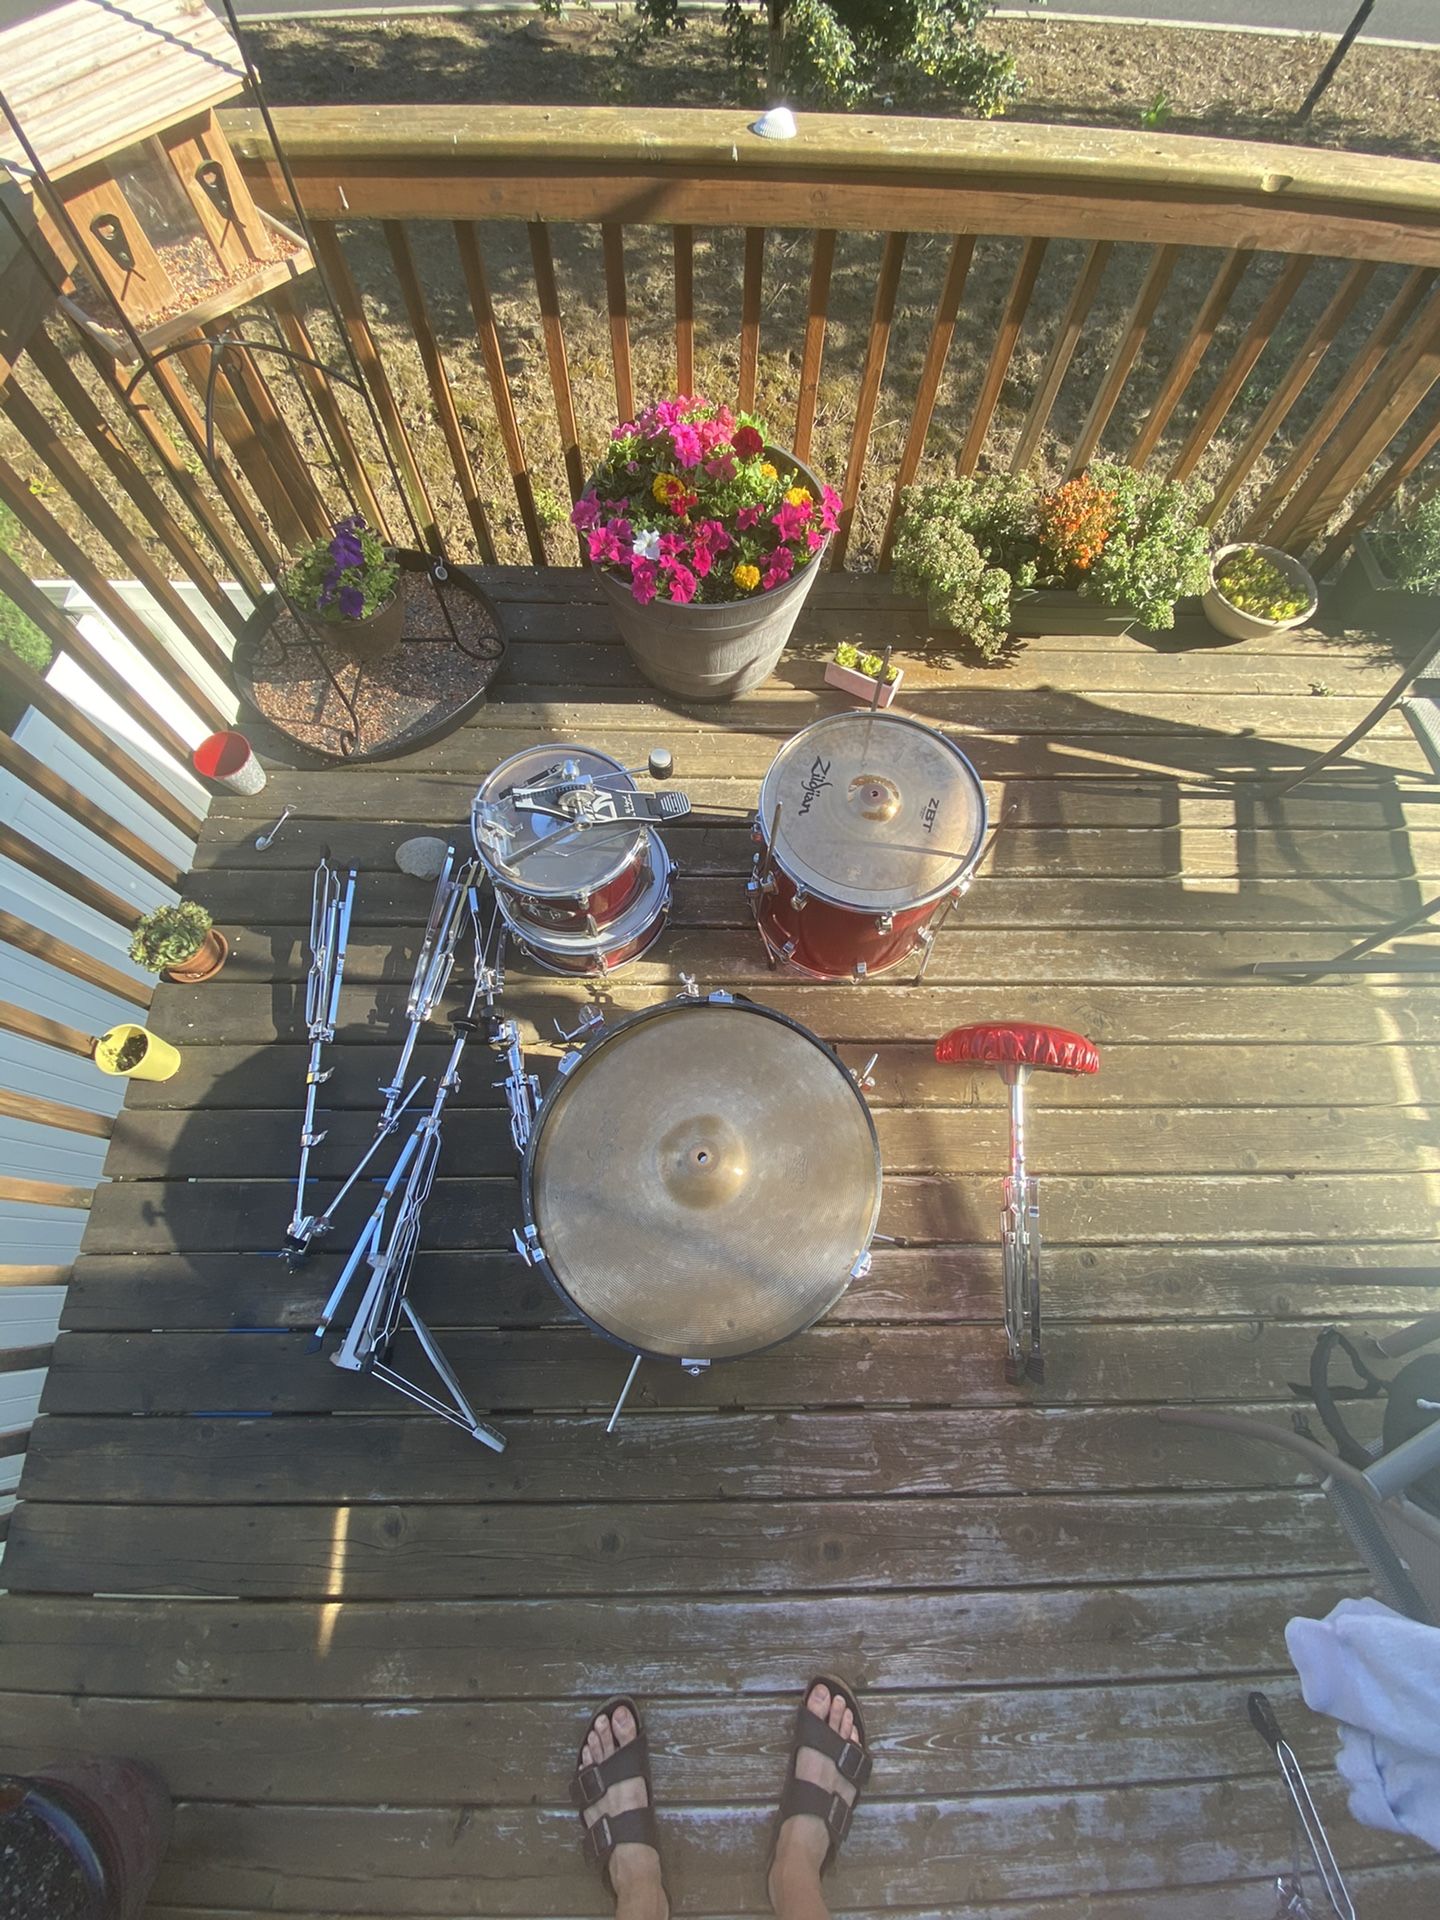 Drum set with 4 Cymbals, Cowbell & Seat